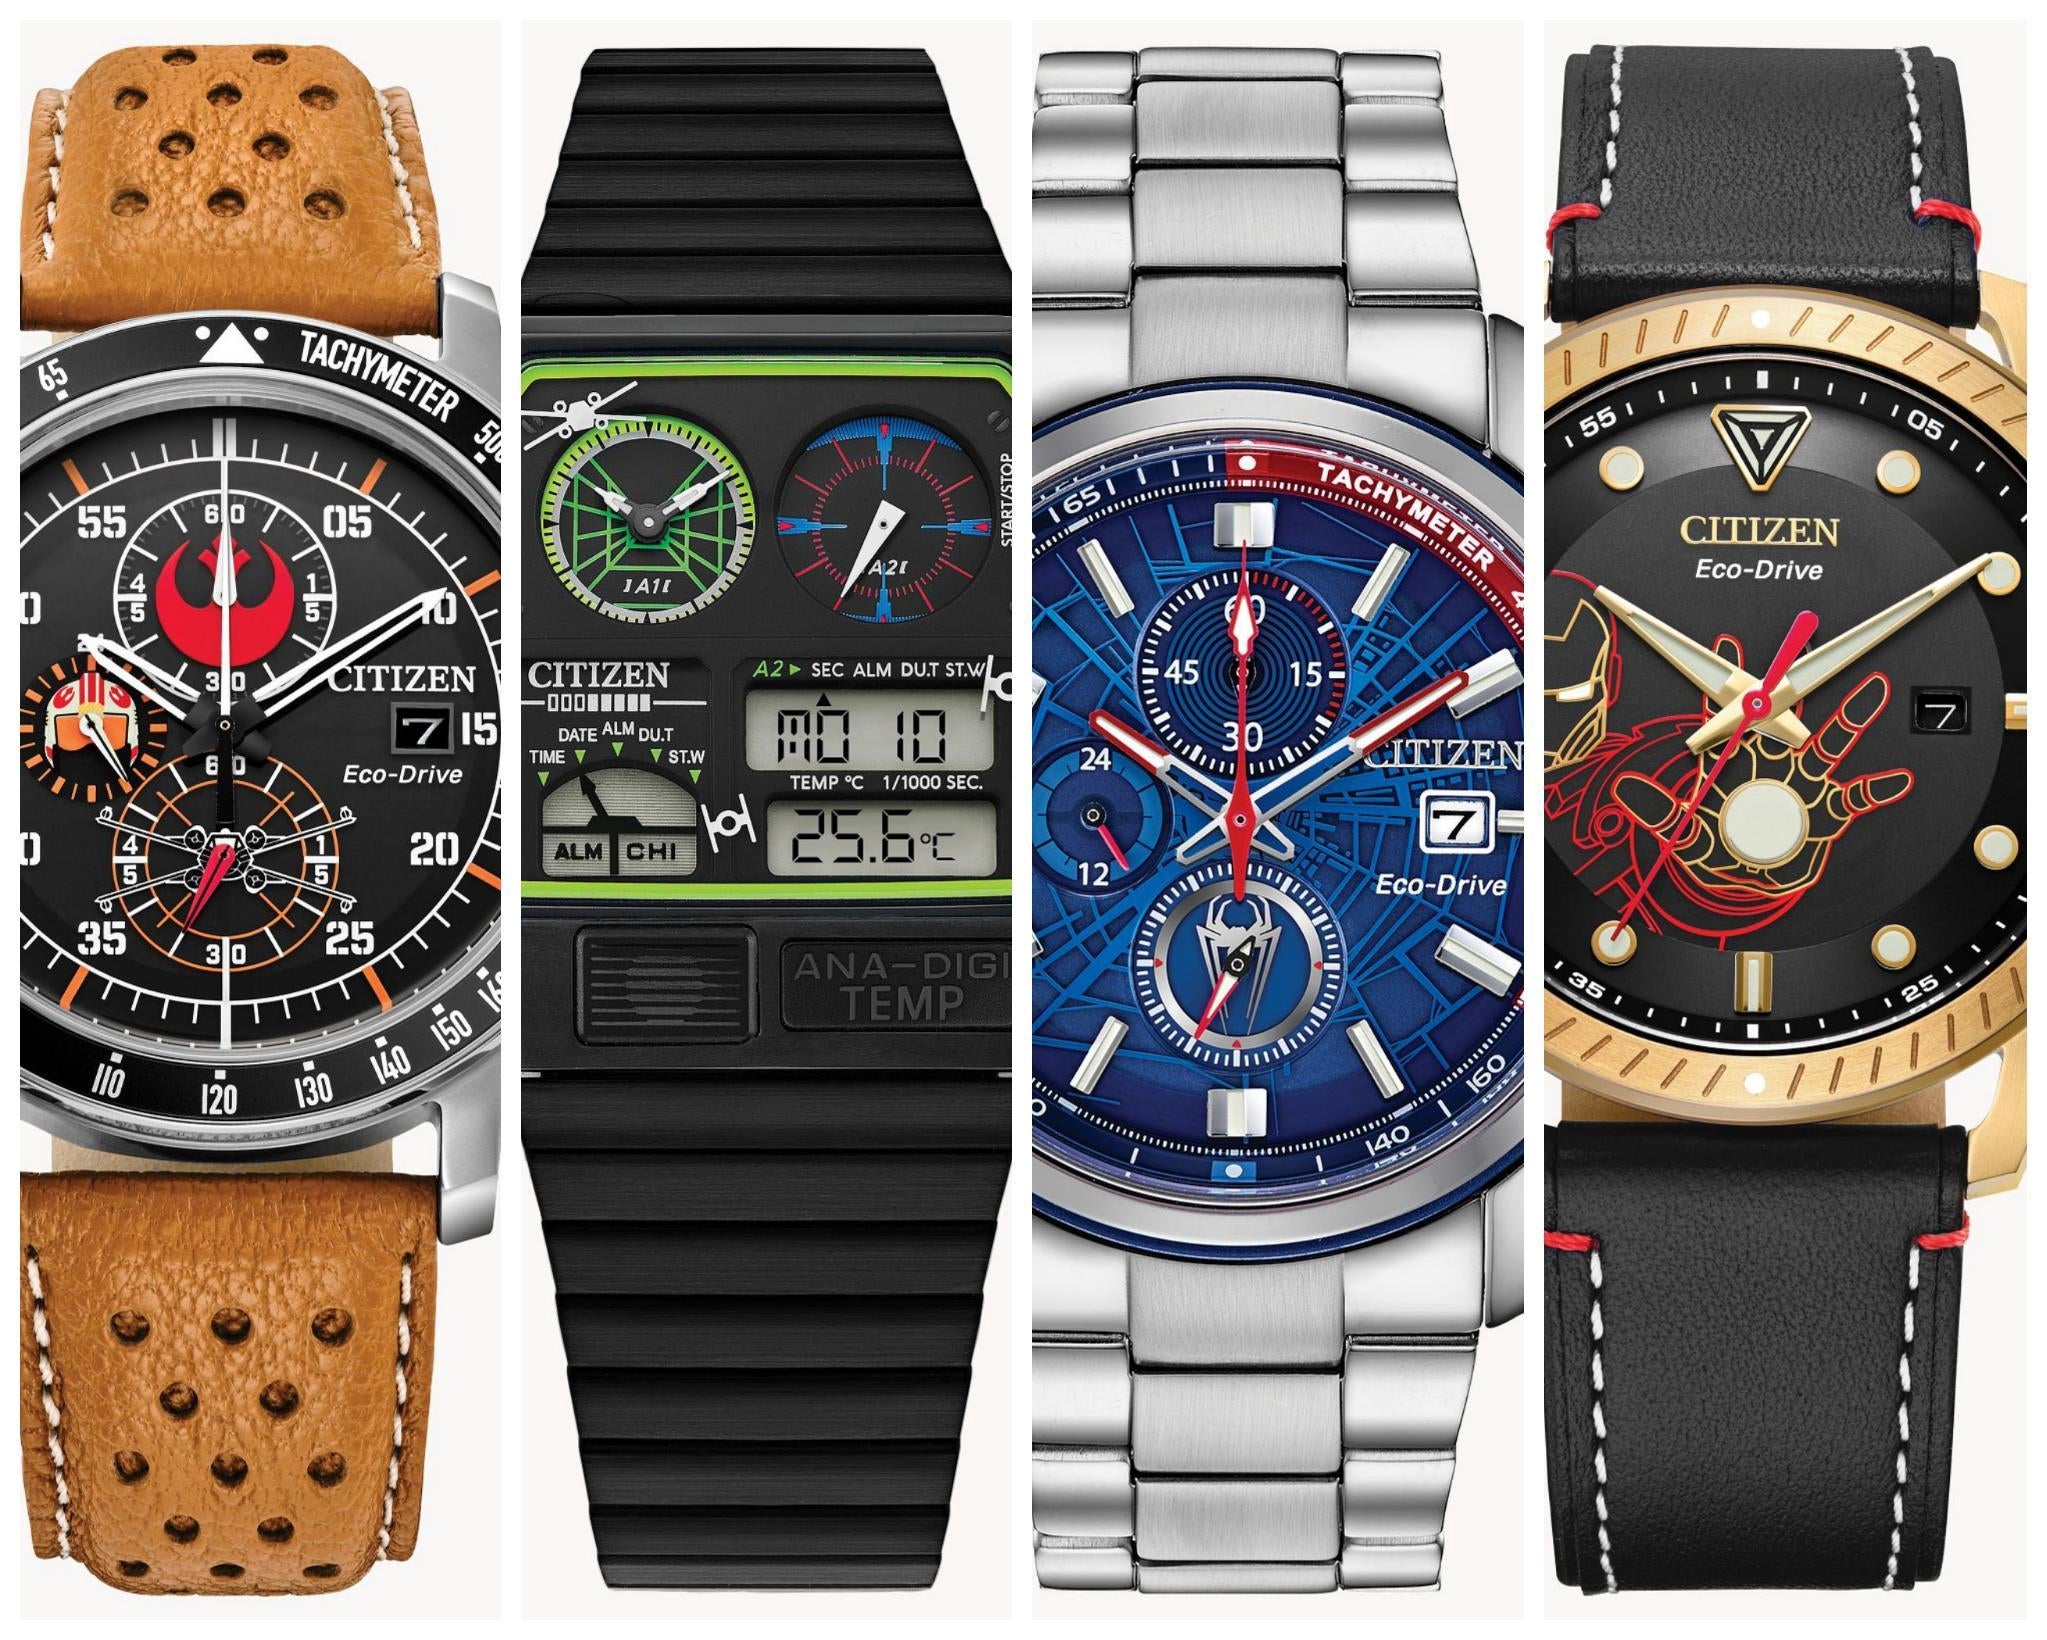 Citizen Marvel and Star Wars Watches Get a Massive Deal